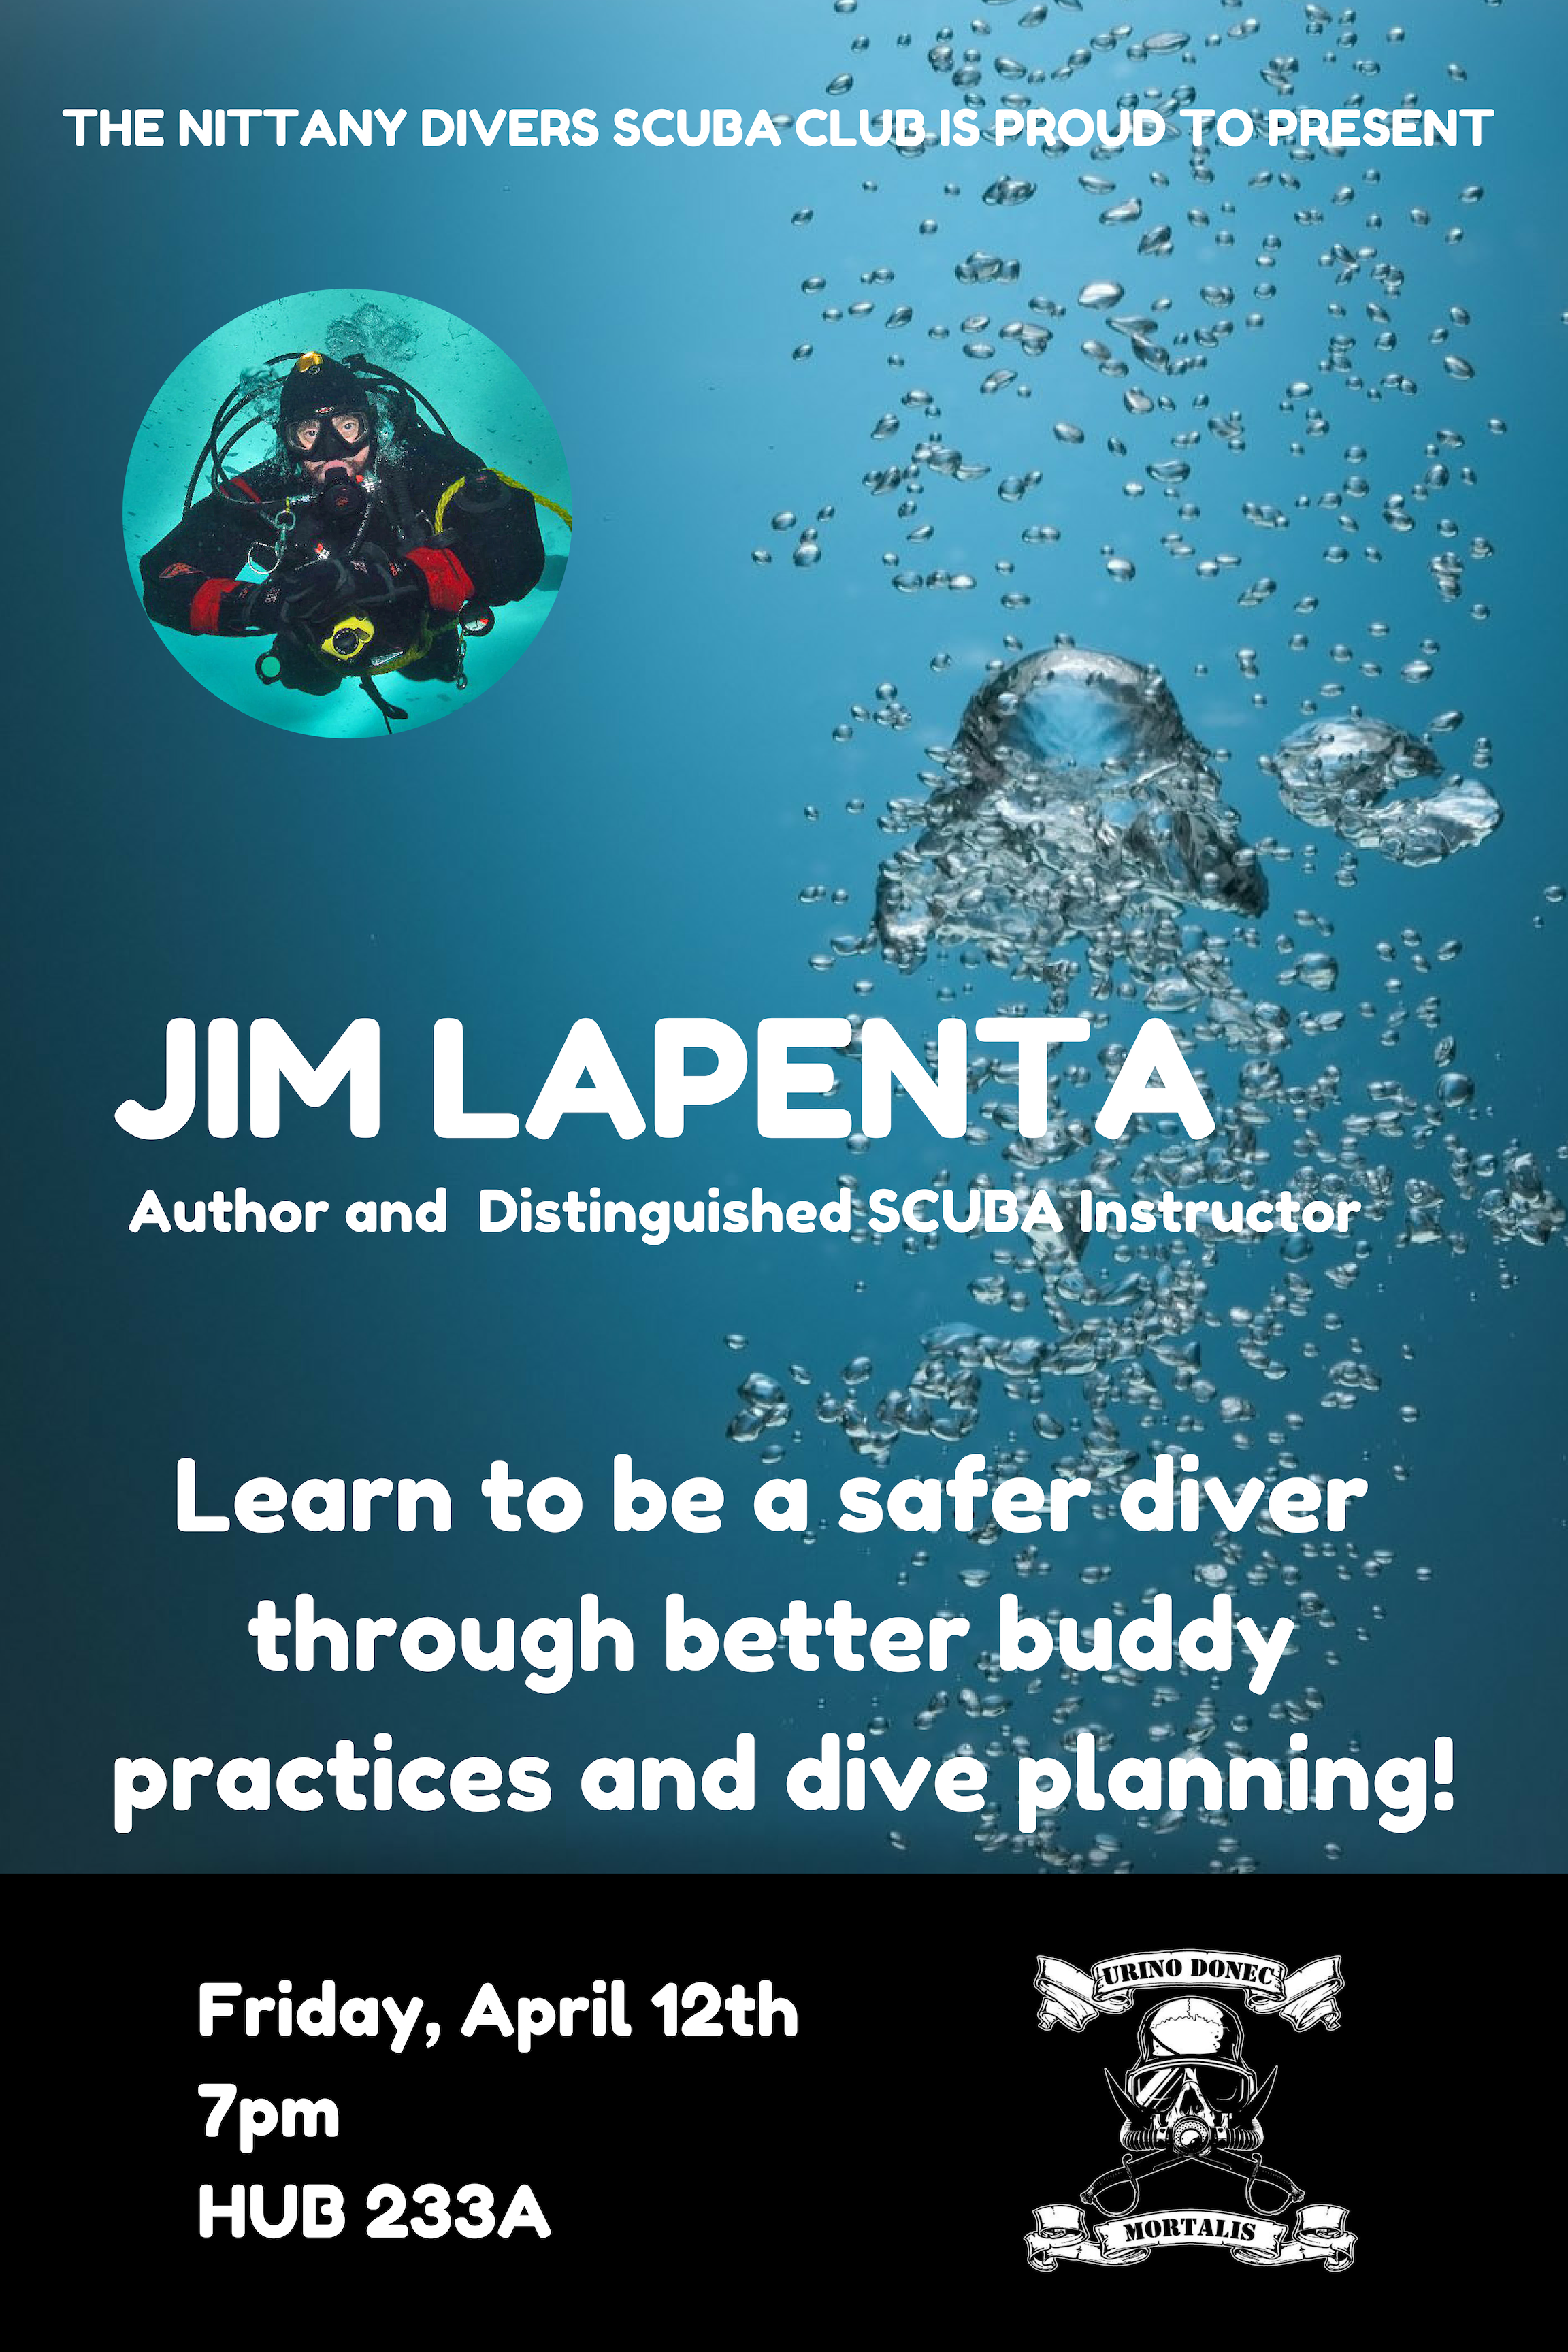 Jim Lapenta, author and distinguished SCUBA instructor, presents on being a safer diver through better buddy practices and dive planning